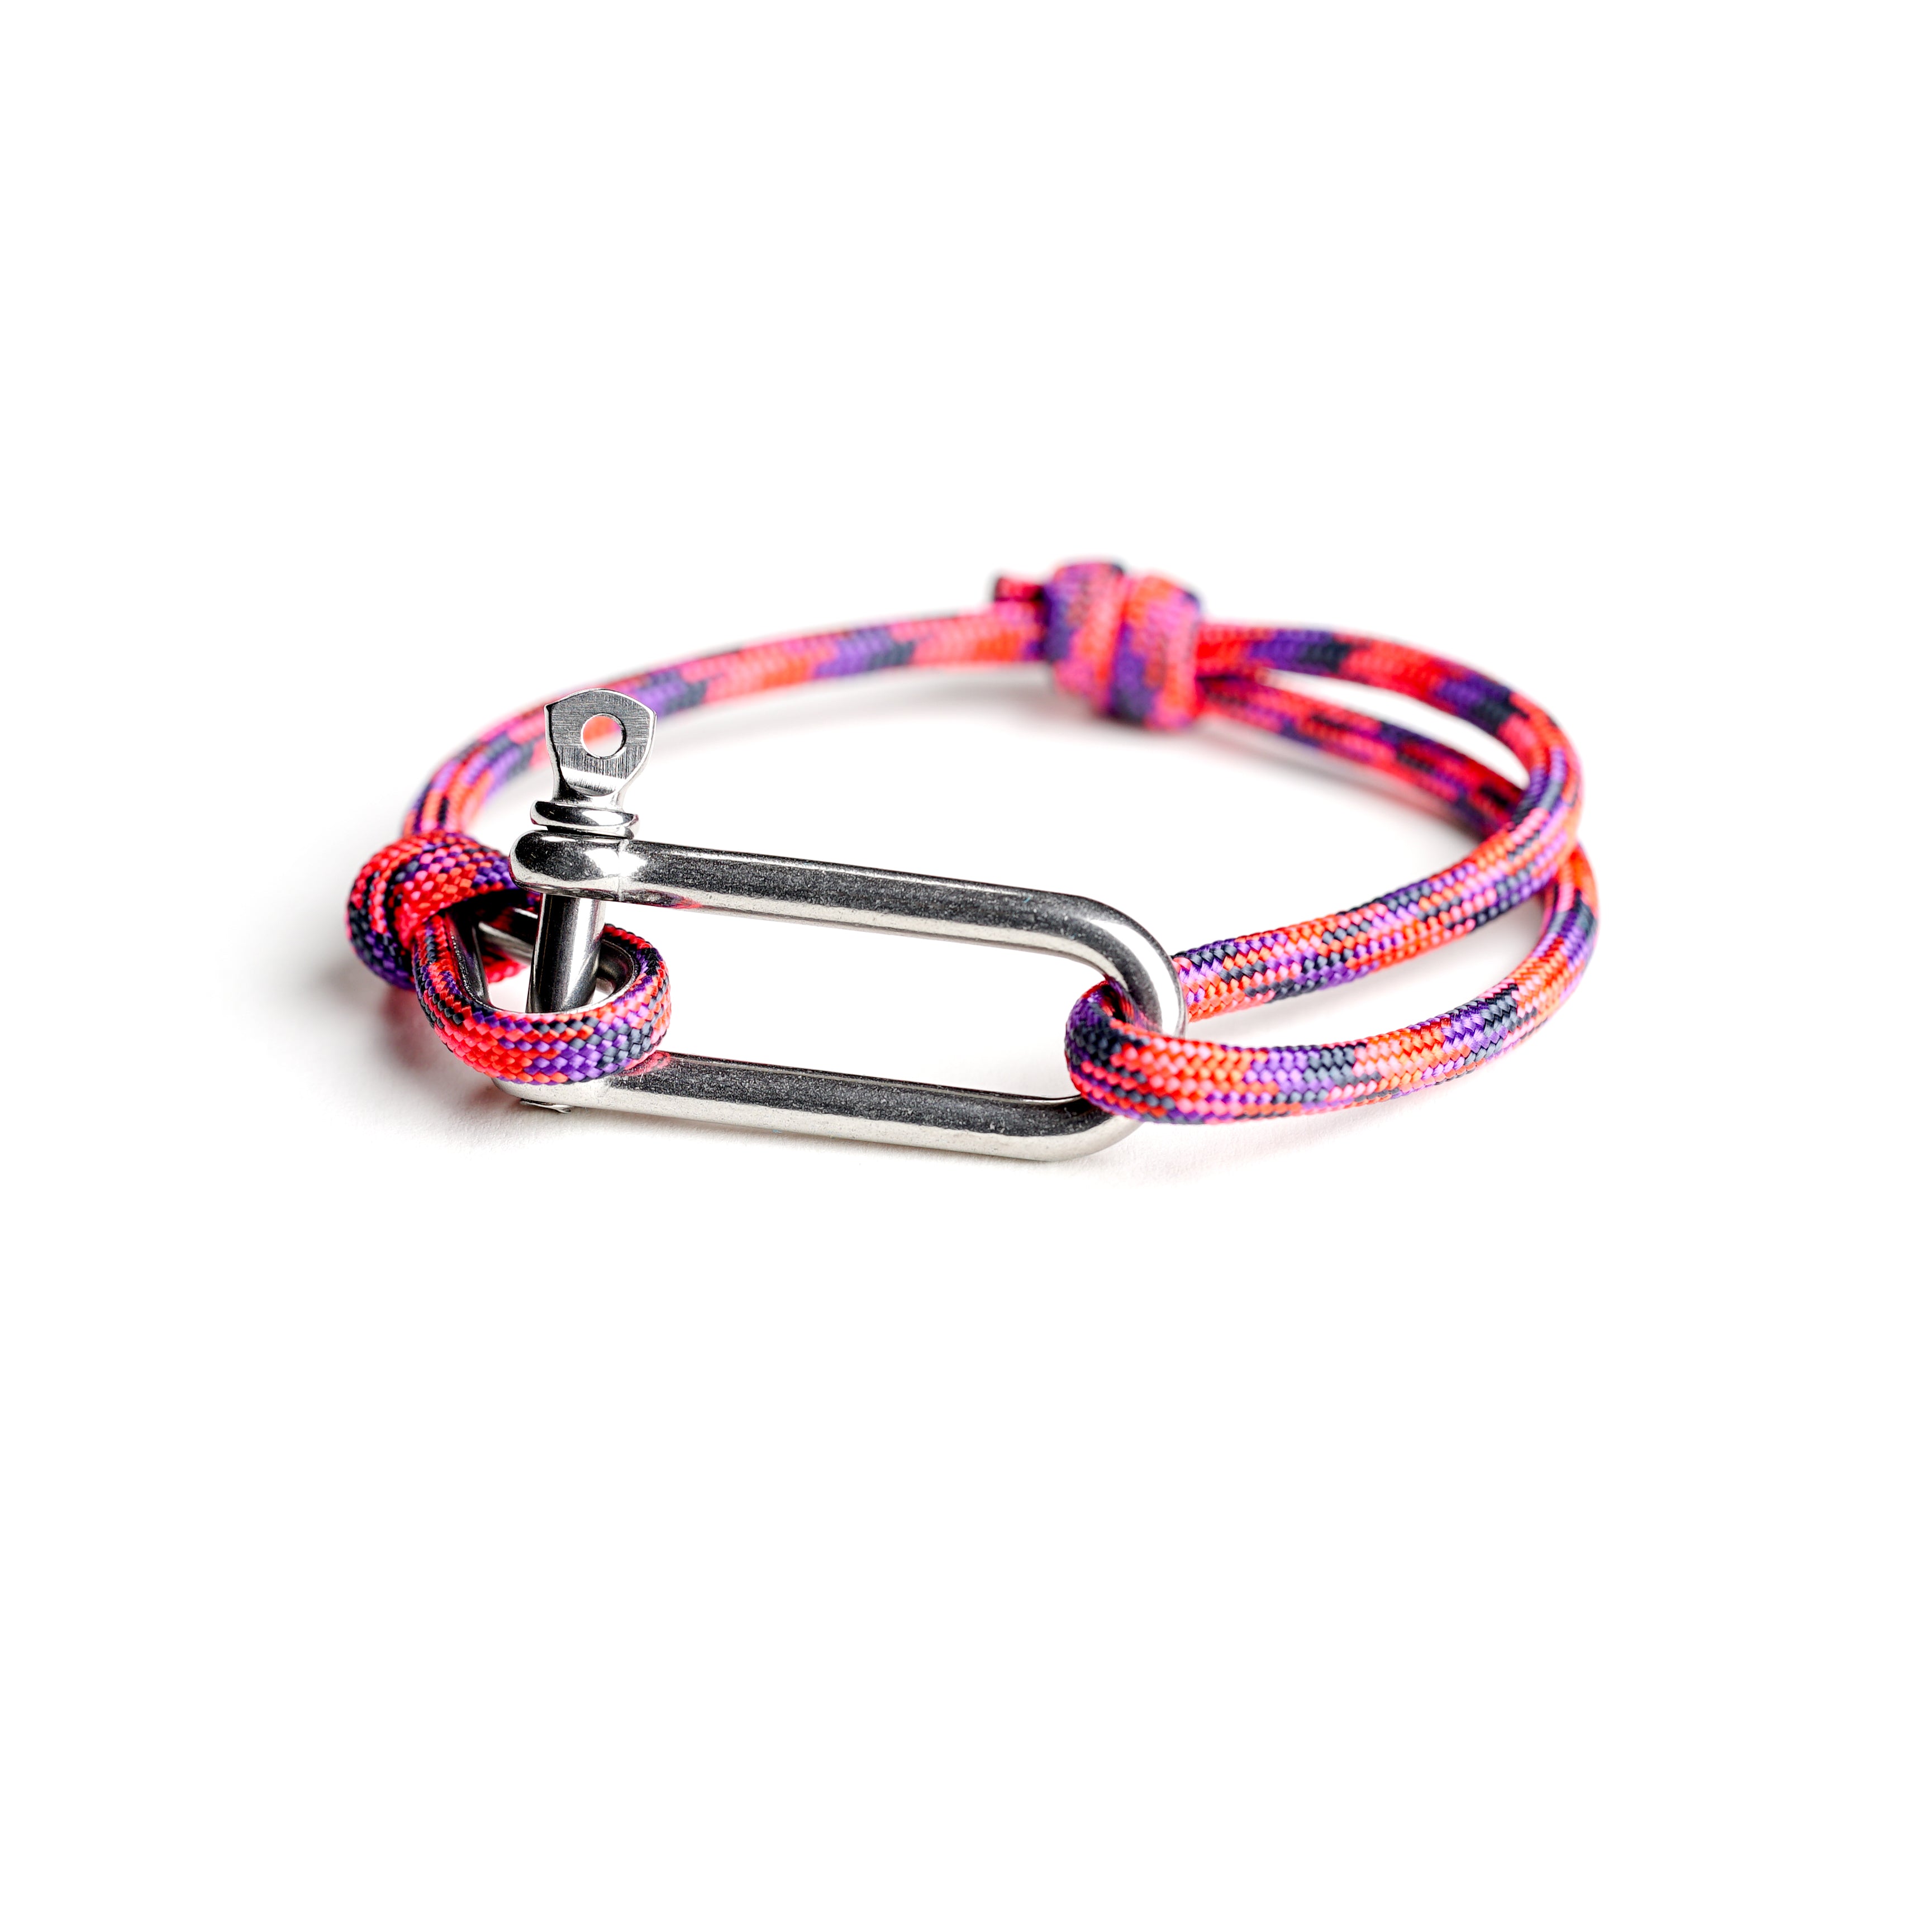 Paracord Nautical Bracelet with Stainless Steel Shackle - Pink & Purple